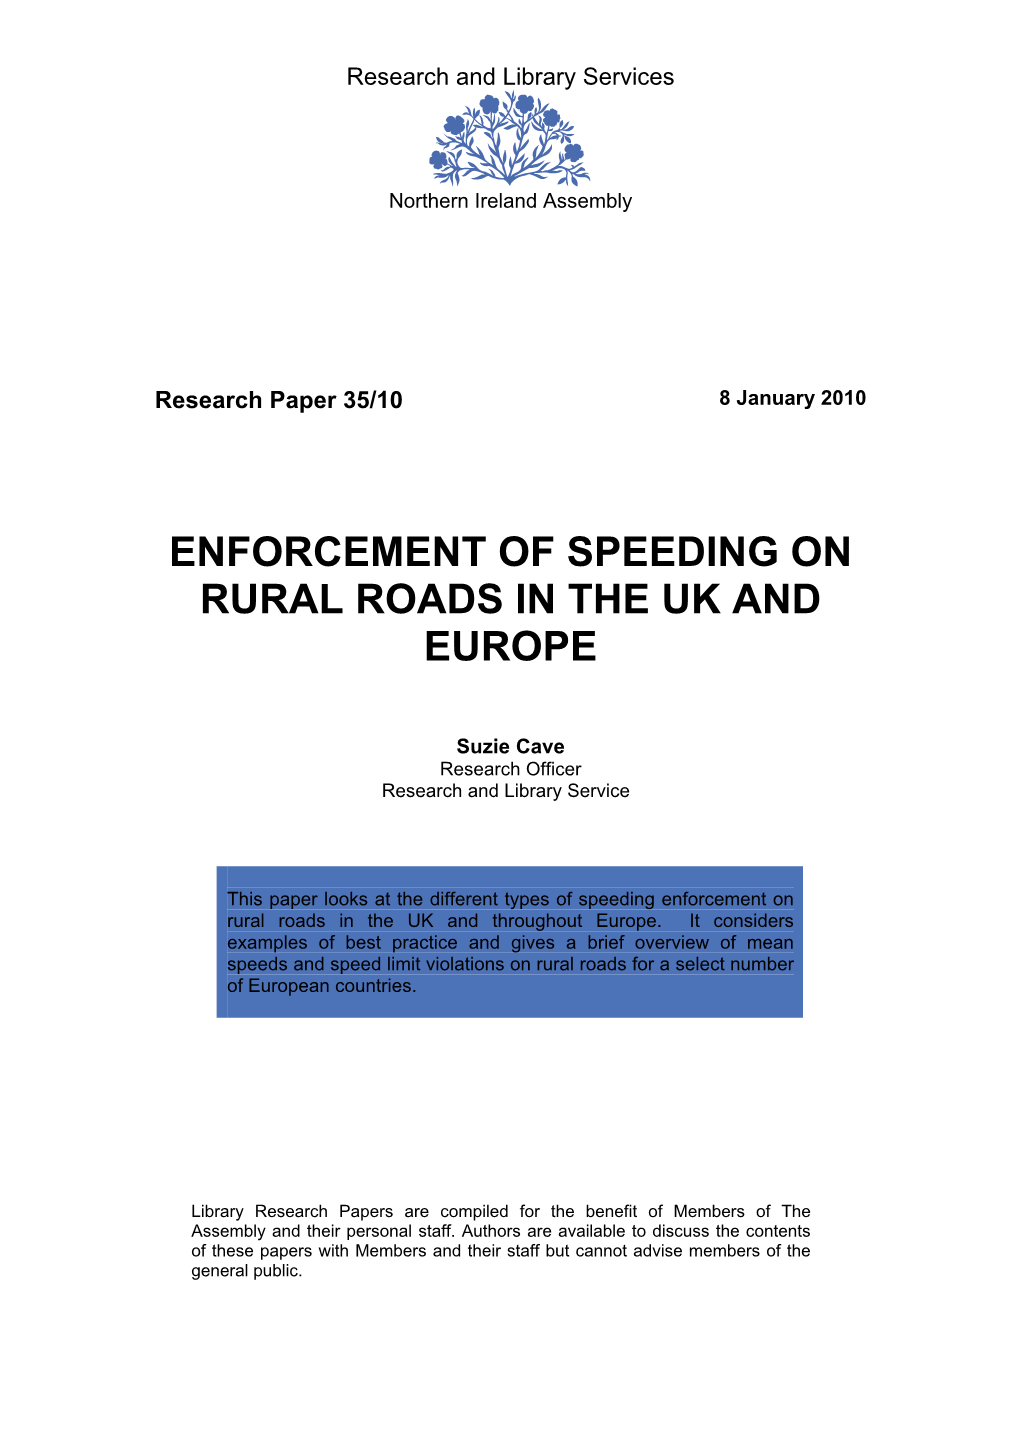 Enforcement of Speeding on Rural Roads in the Uk and Europe